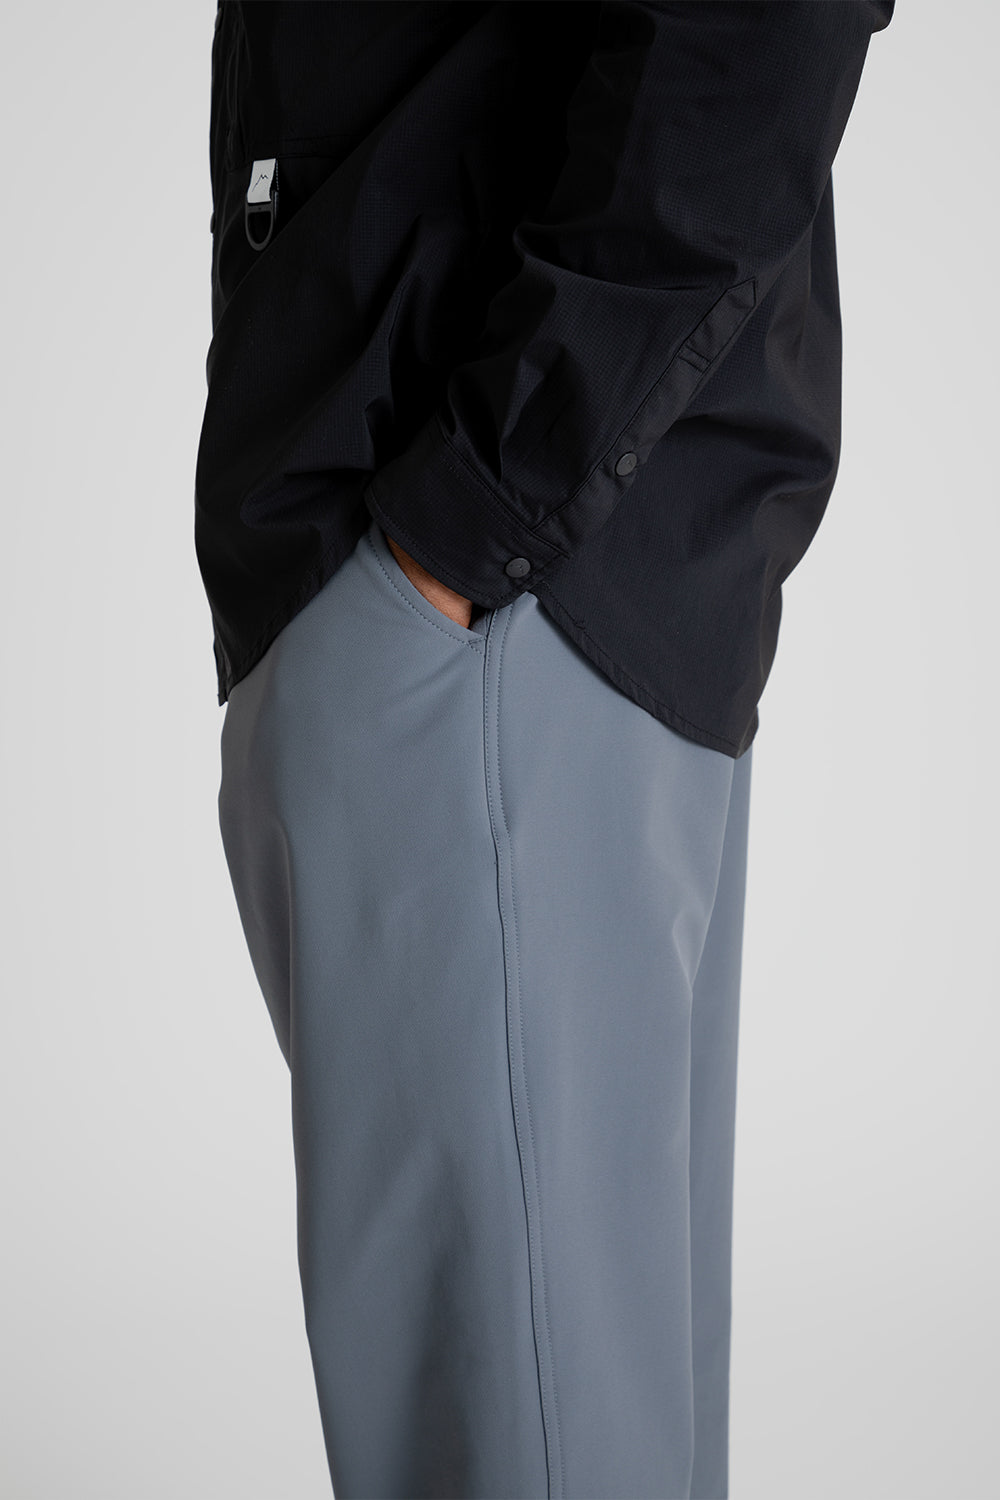 Cayl Soft Shell Simple Pants in Grey